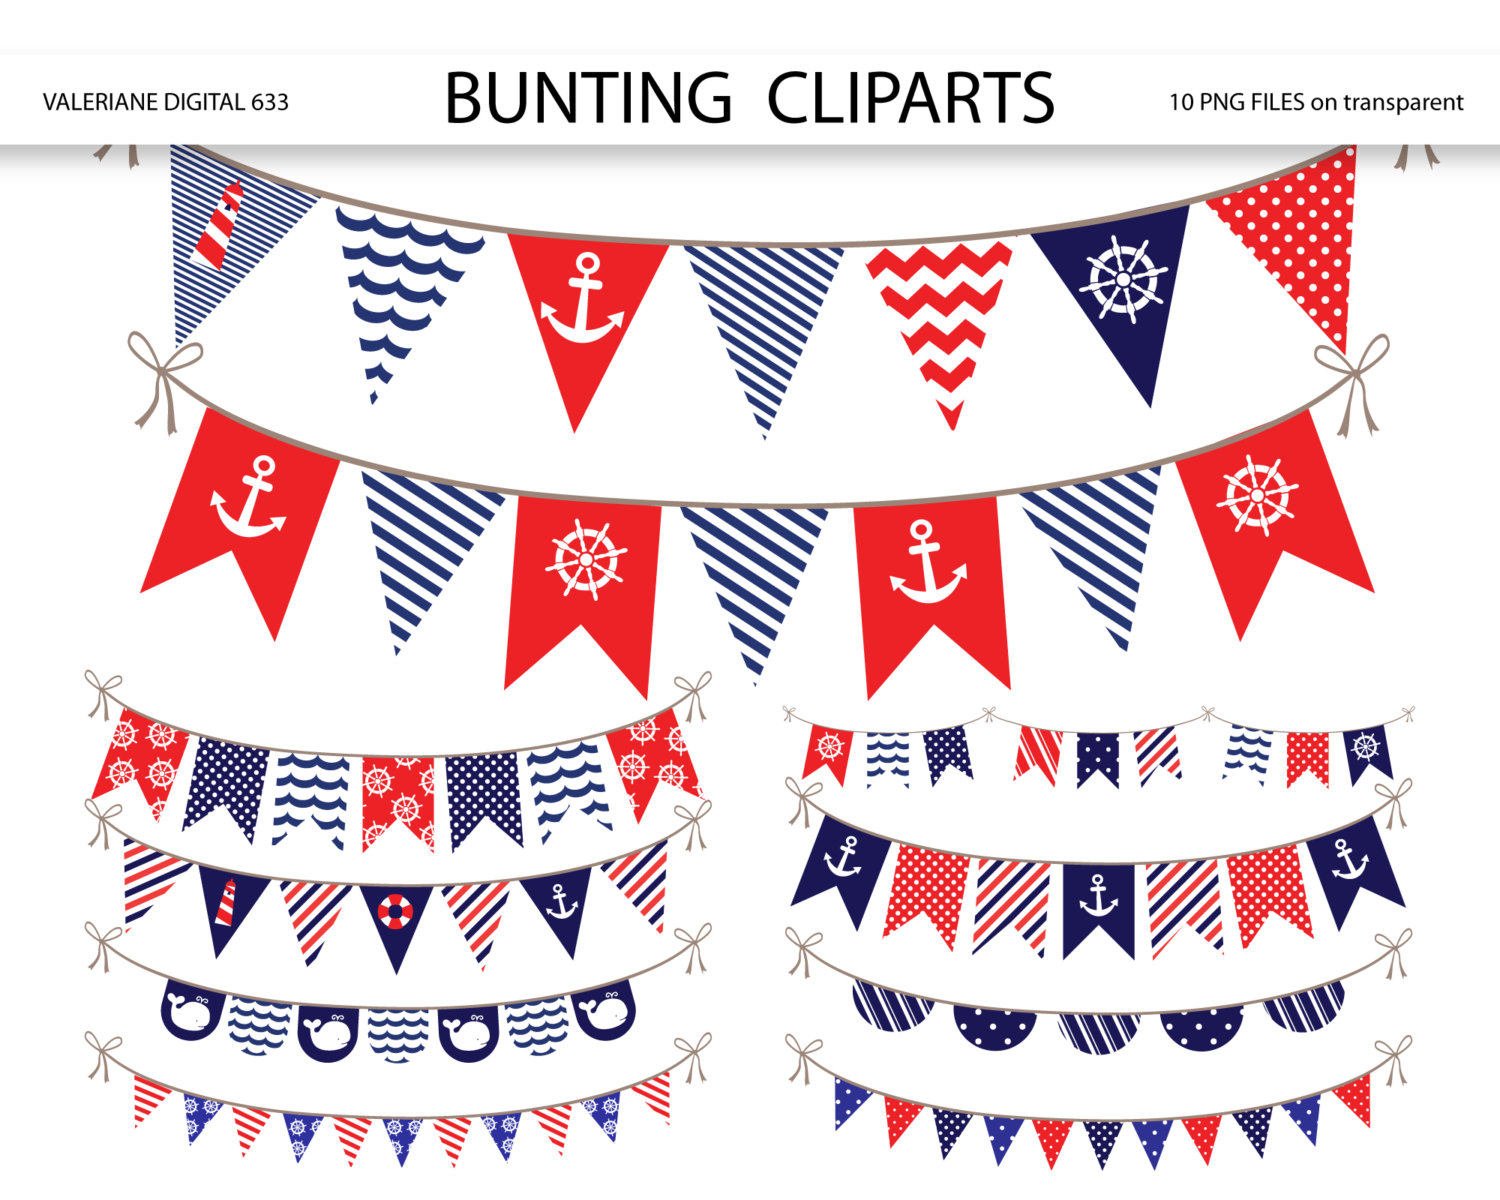 Nautical Bunting banner clipart, nautical clipart, bunting banners clip art pack for invitations,